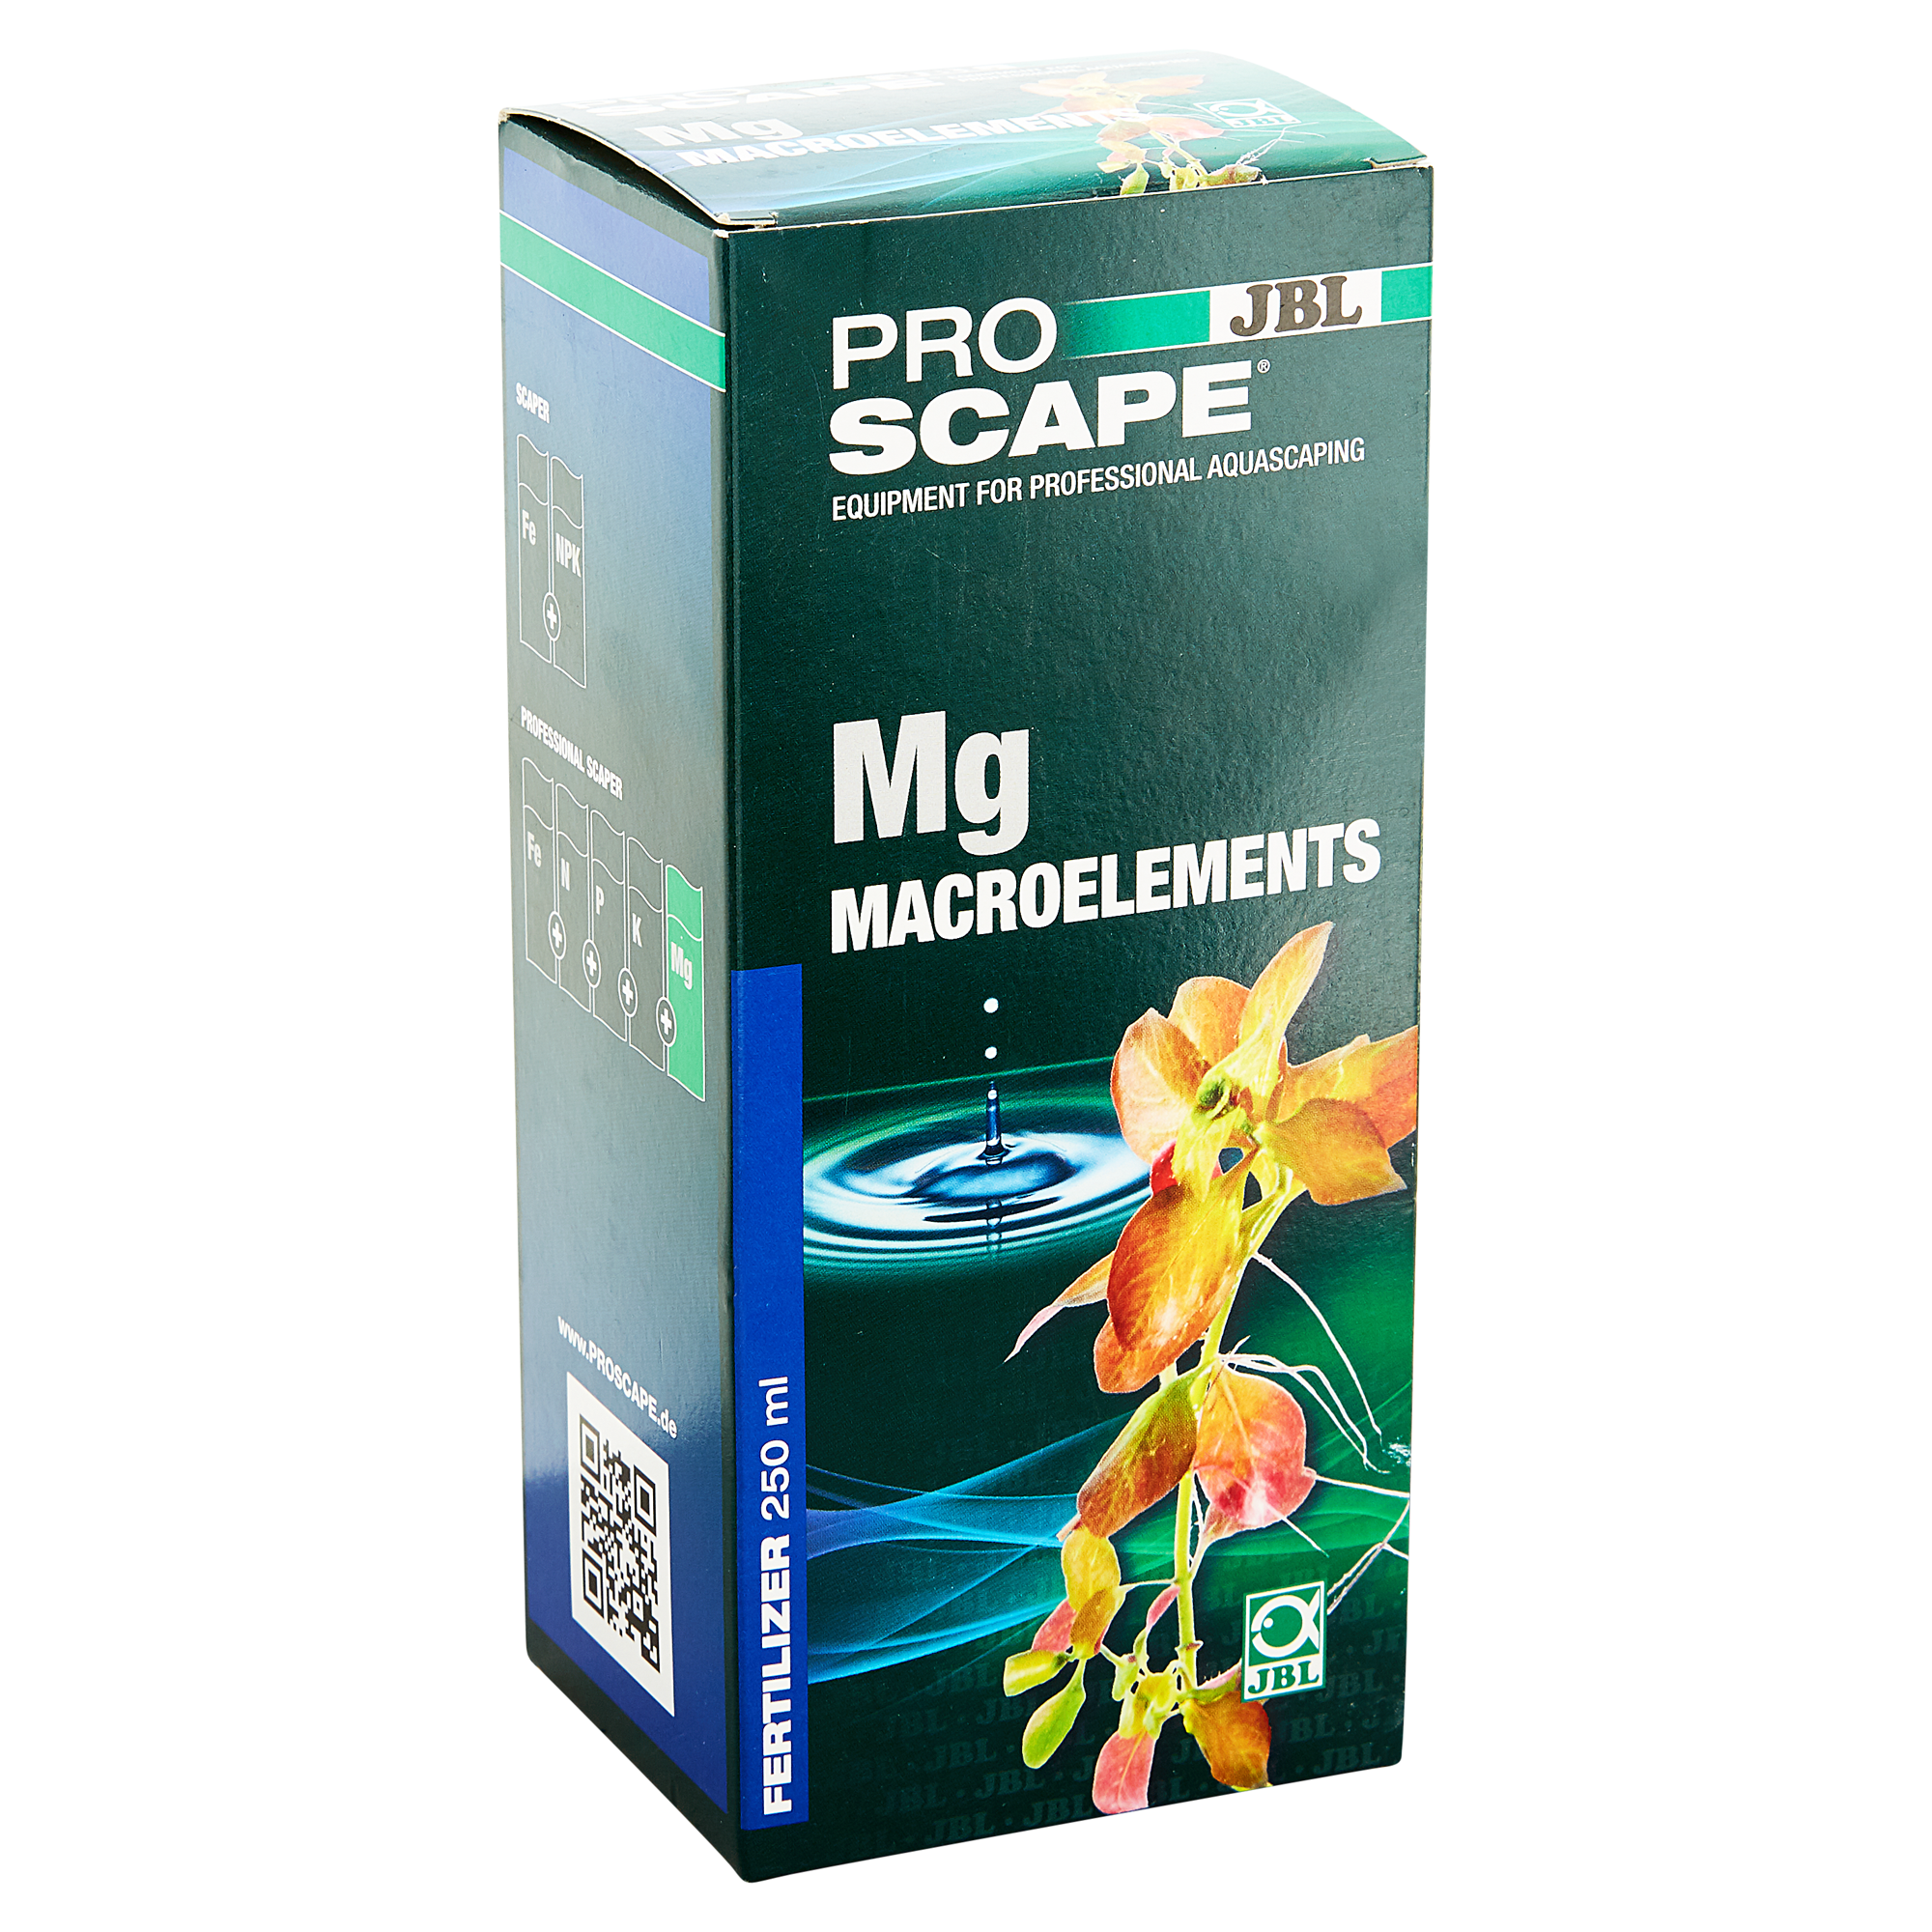 Pflanzendünger "Pro Scape" Mg Macroelements 250 ml + product picture